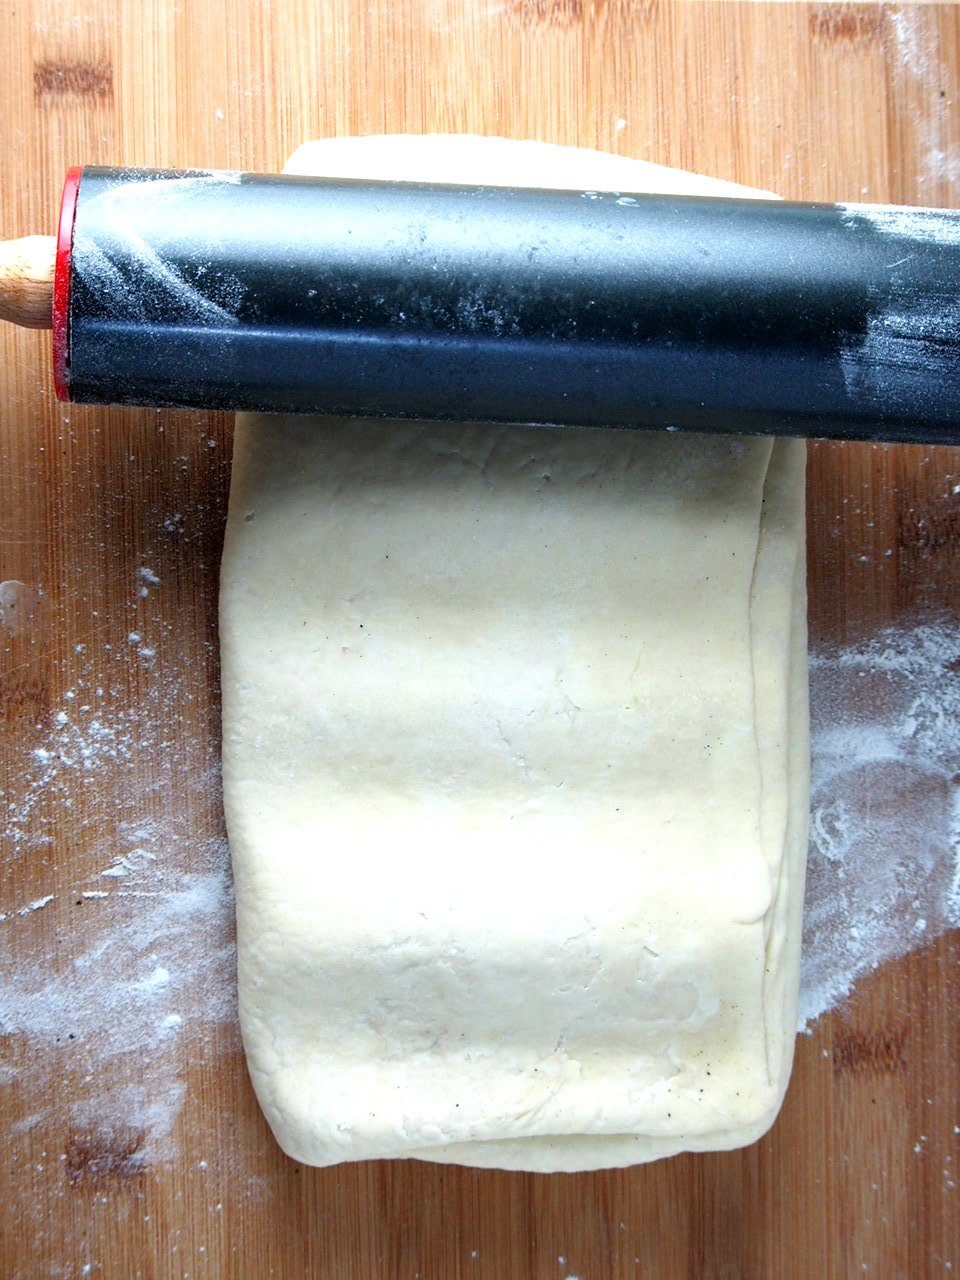 A croissant dough recipe that yields flaky and buttery pastry. It can be used to make a variety of breakfast treats.